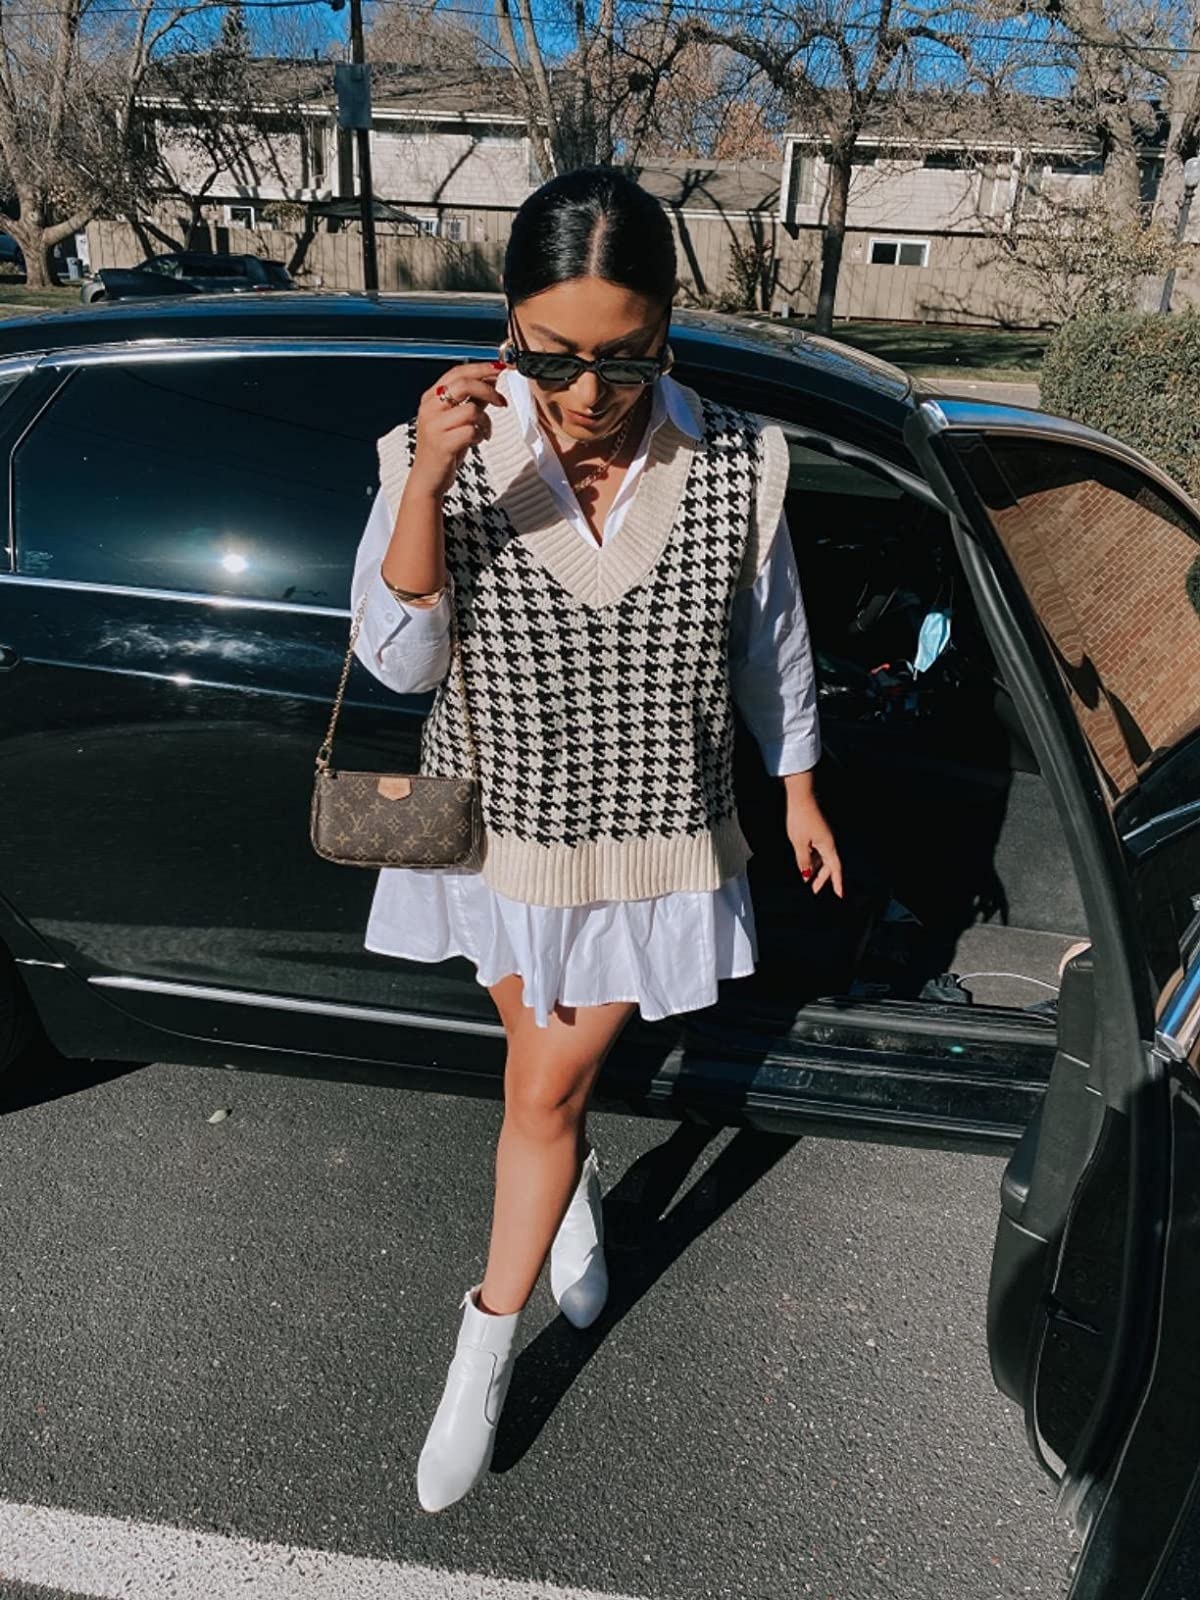 reviewer steps out of a car wearing the oversized houndstooth knitted vest over a white shirt-dress